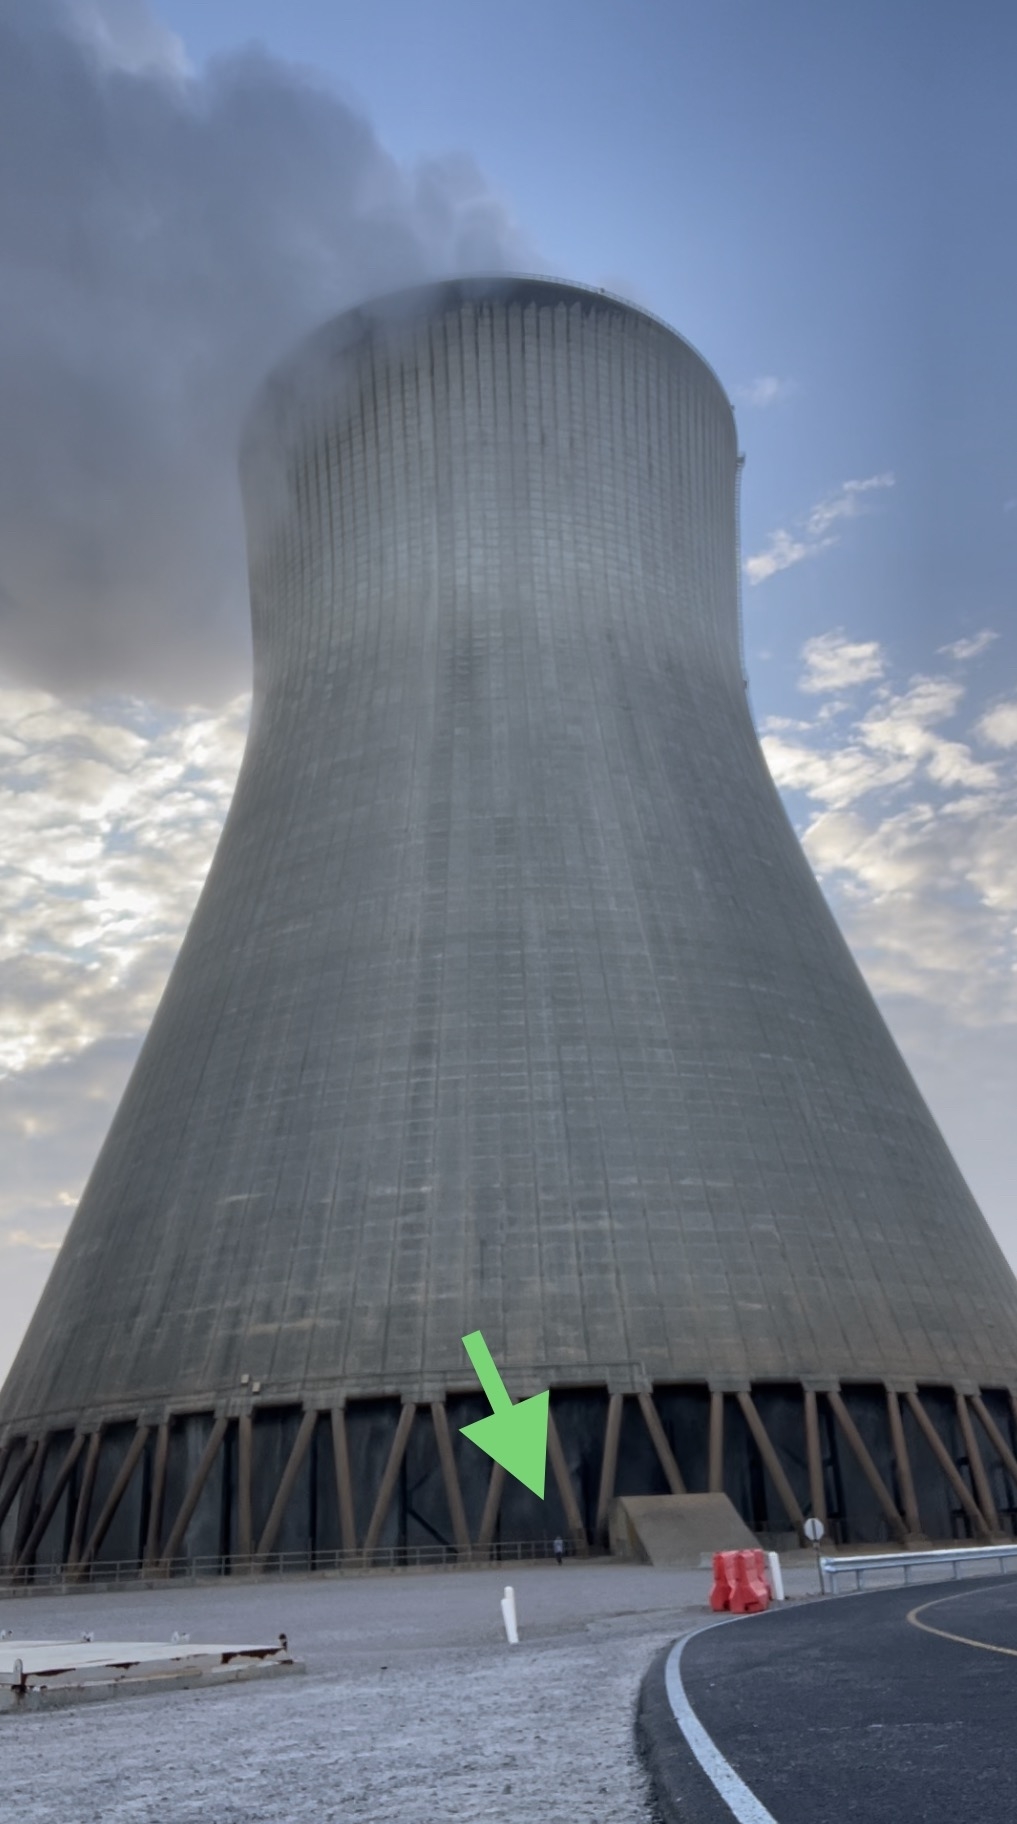 a person standing next to a nuclear cooling tower